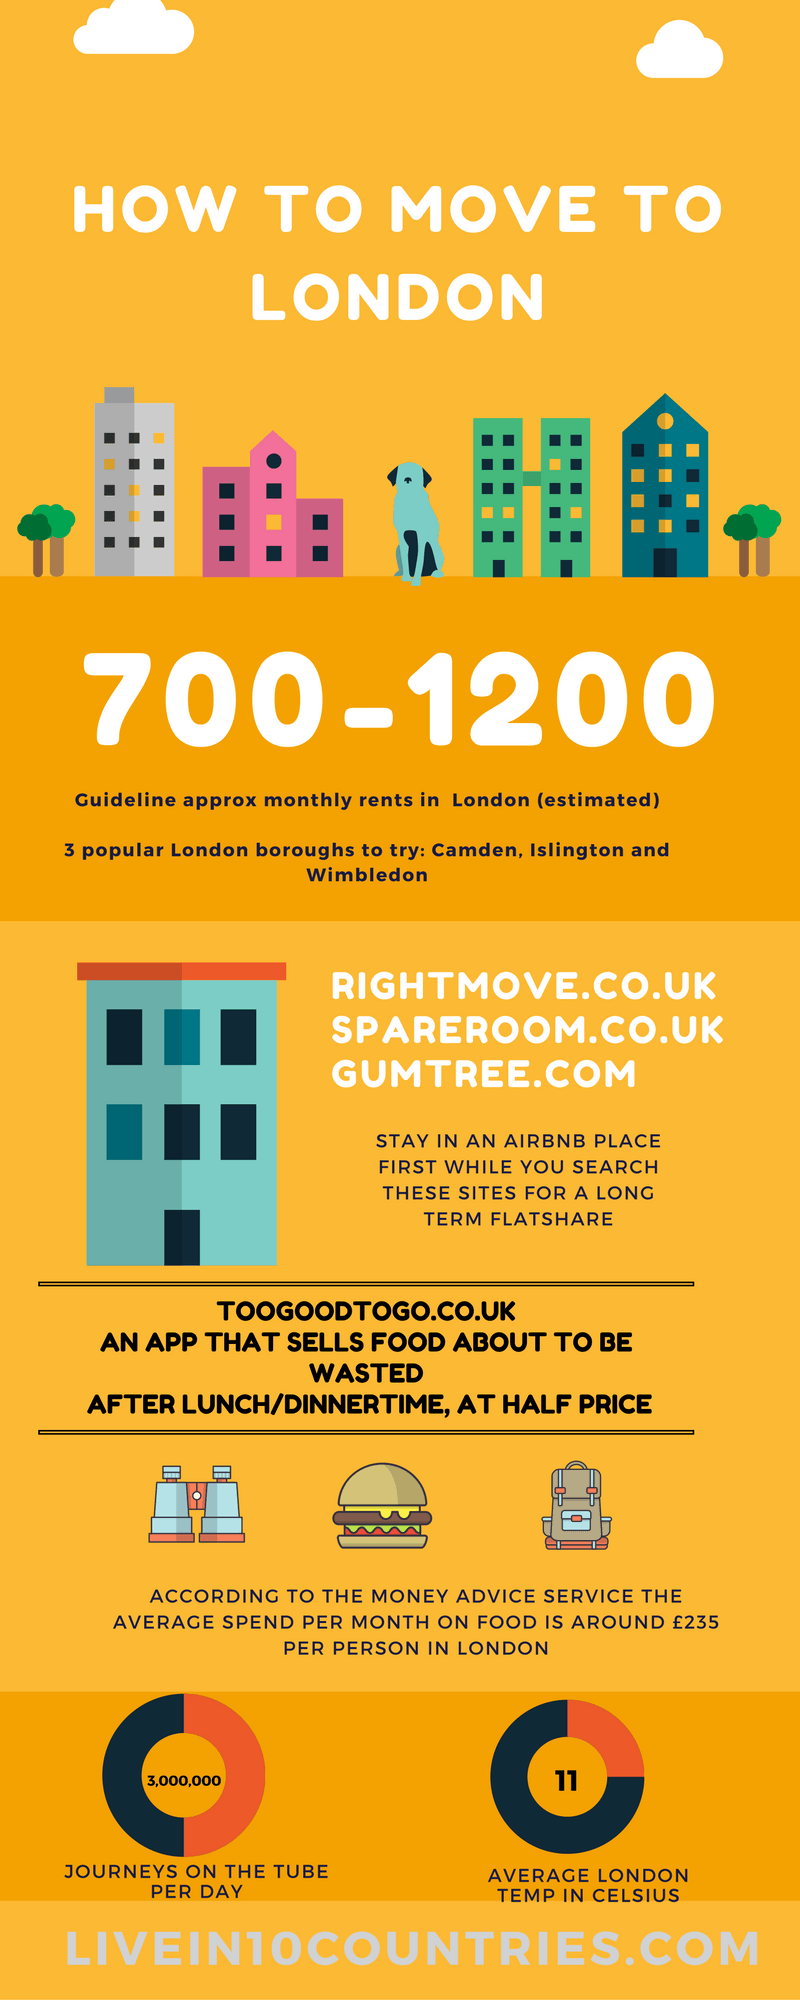 How to move to London with no job